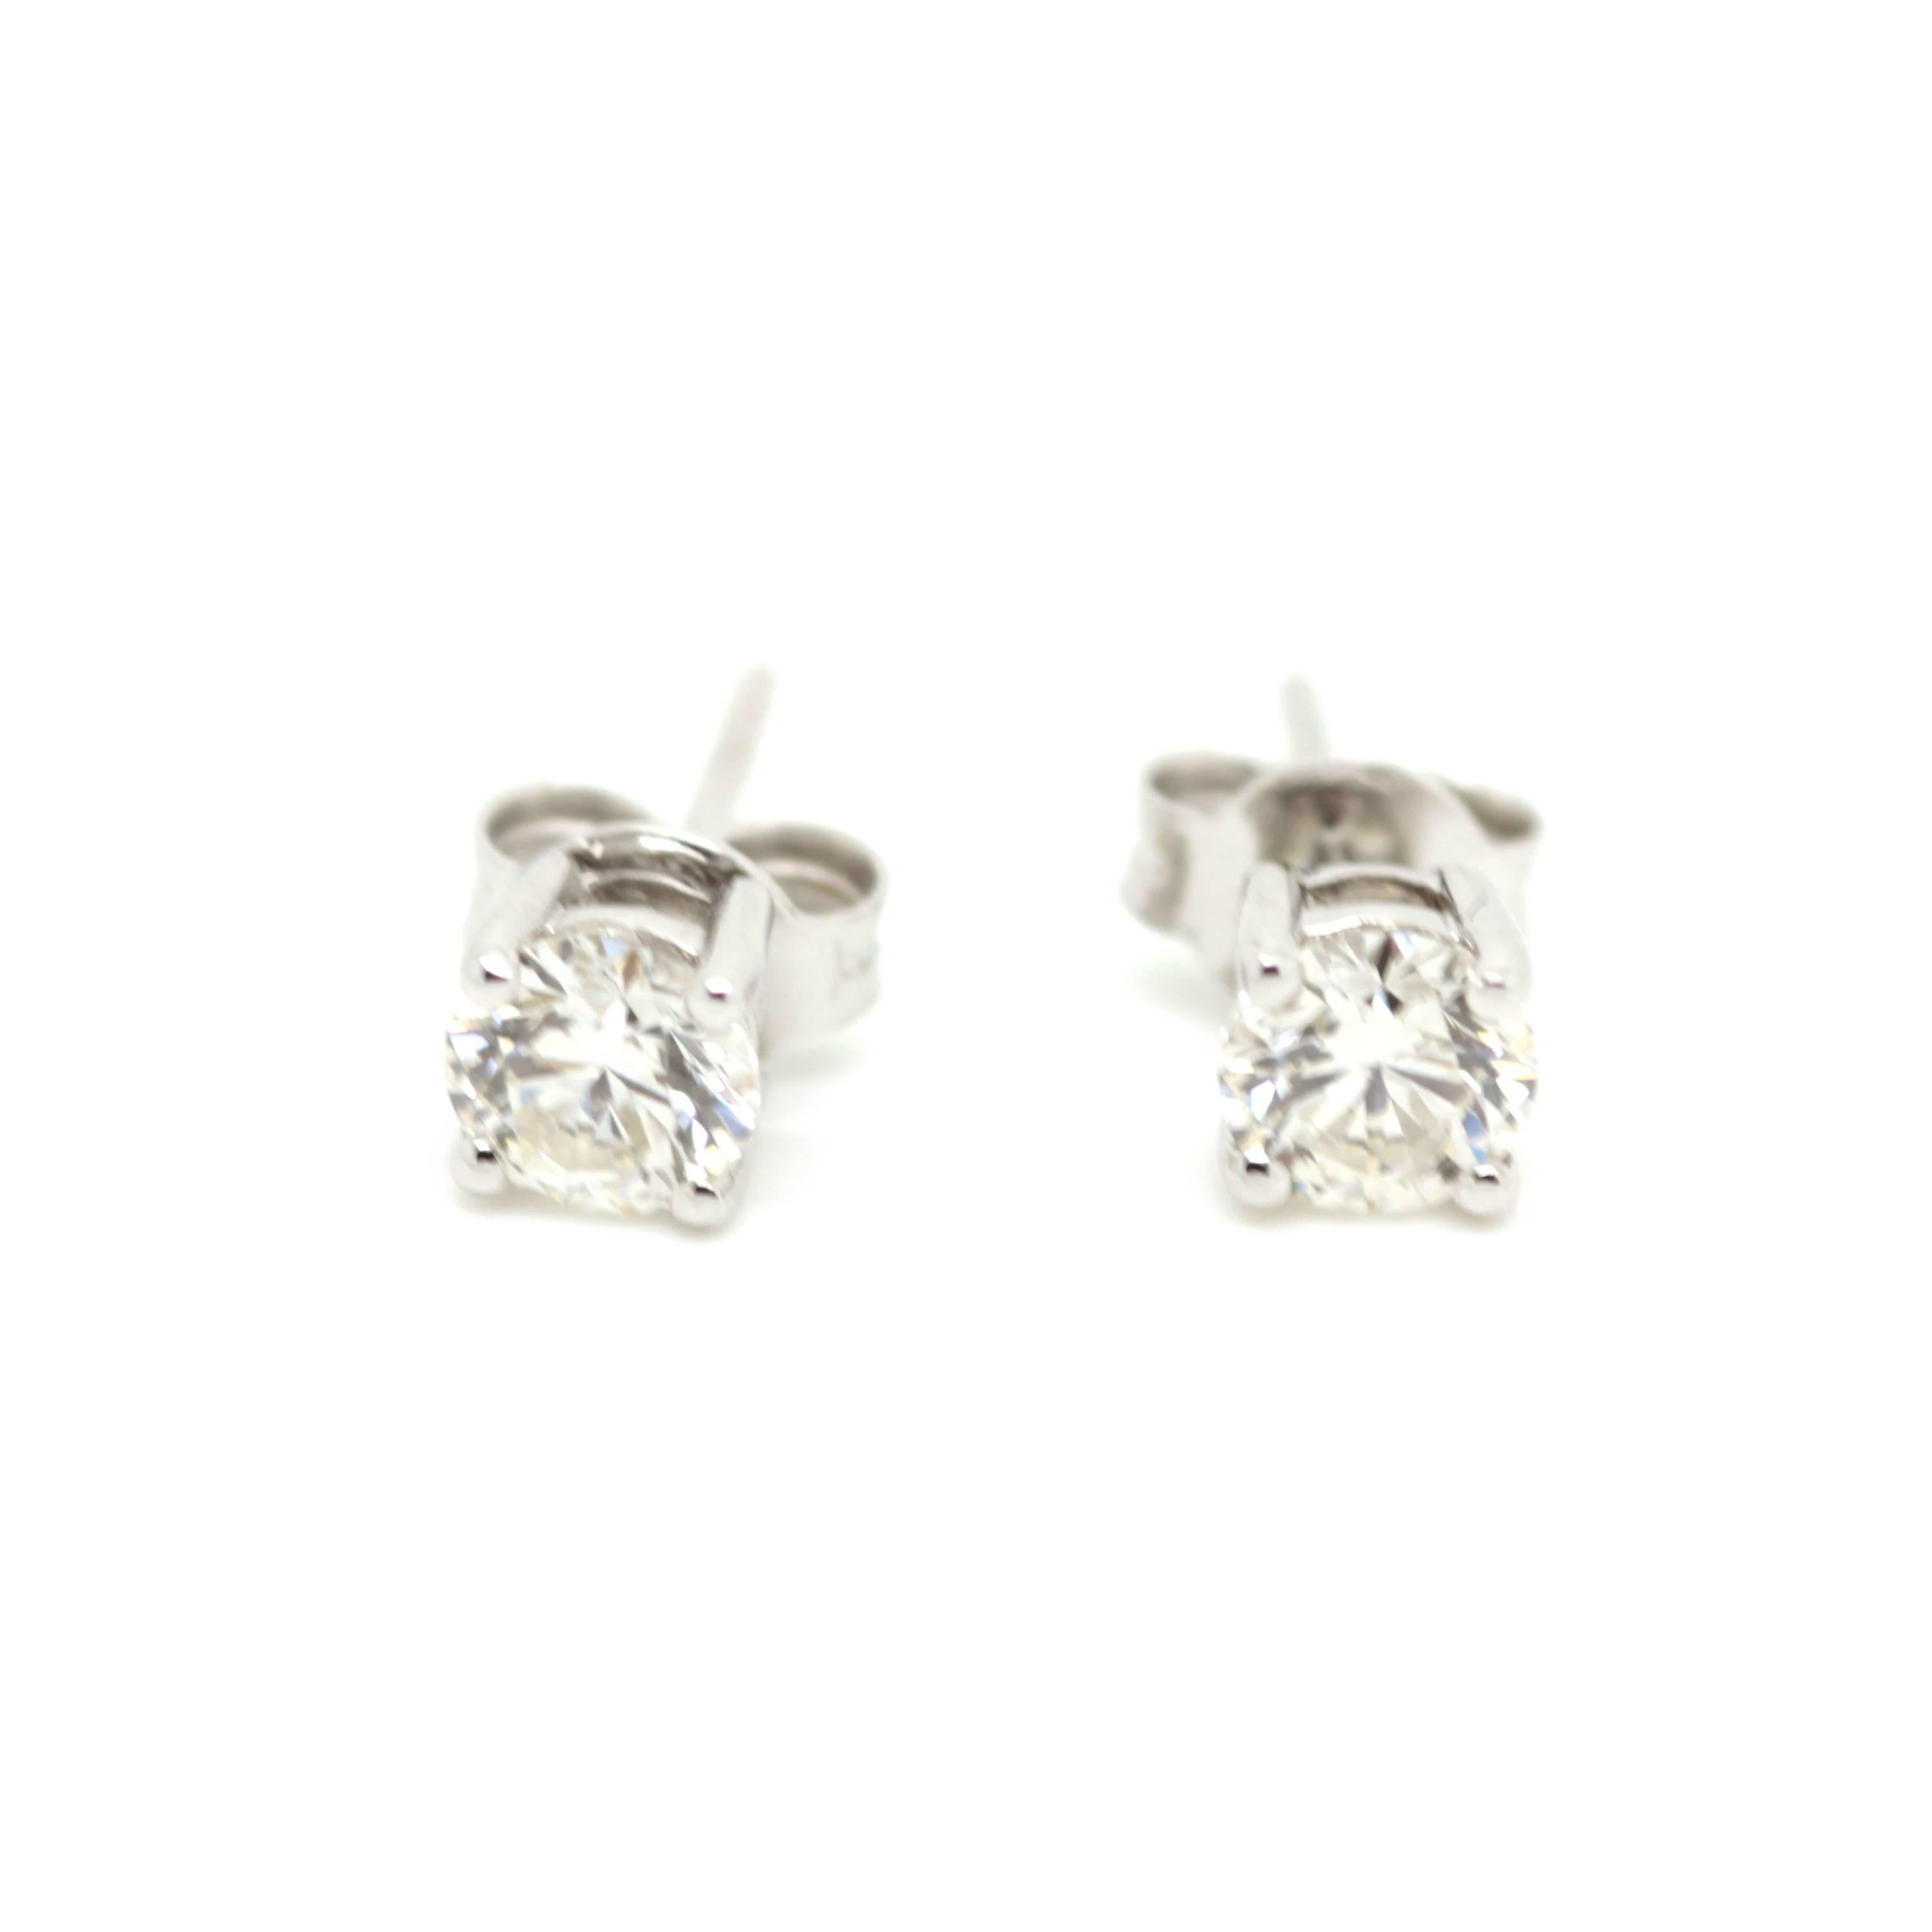 0.5 carat total weight diamond solitaire earrings, set in a 4 claw 18ct white gold setting.  Approximate clarity is VS1/2, approximate colour G/H.  Circa: New Price £3950
